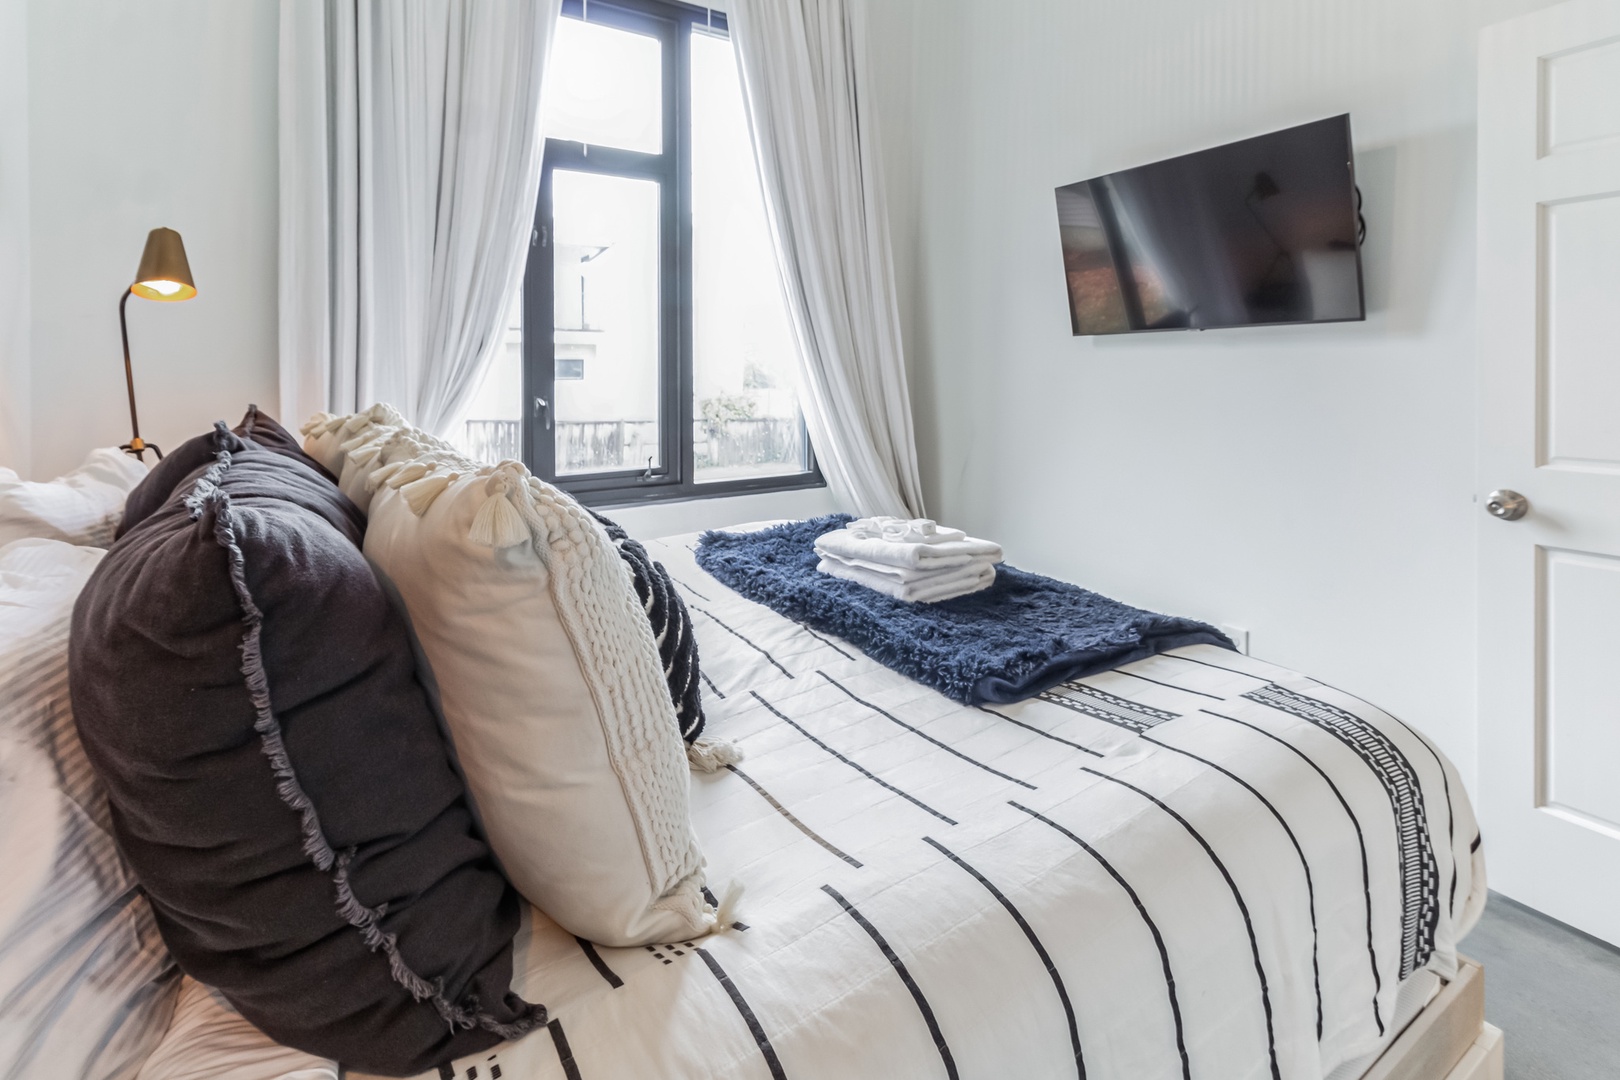 Unit C1: The private bedroom offers a luxurious king-sized bed & Smart TV